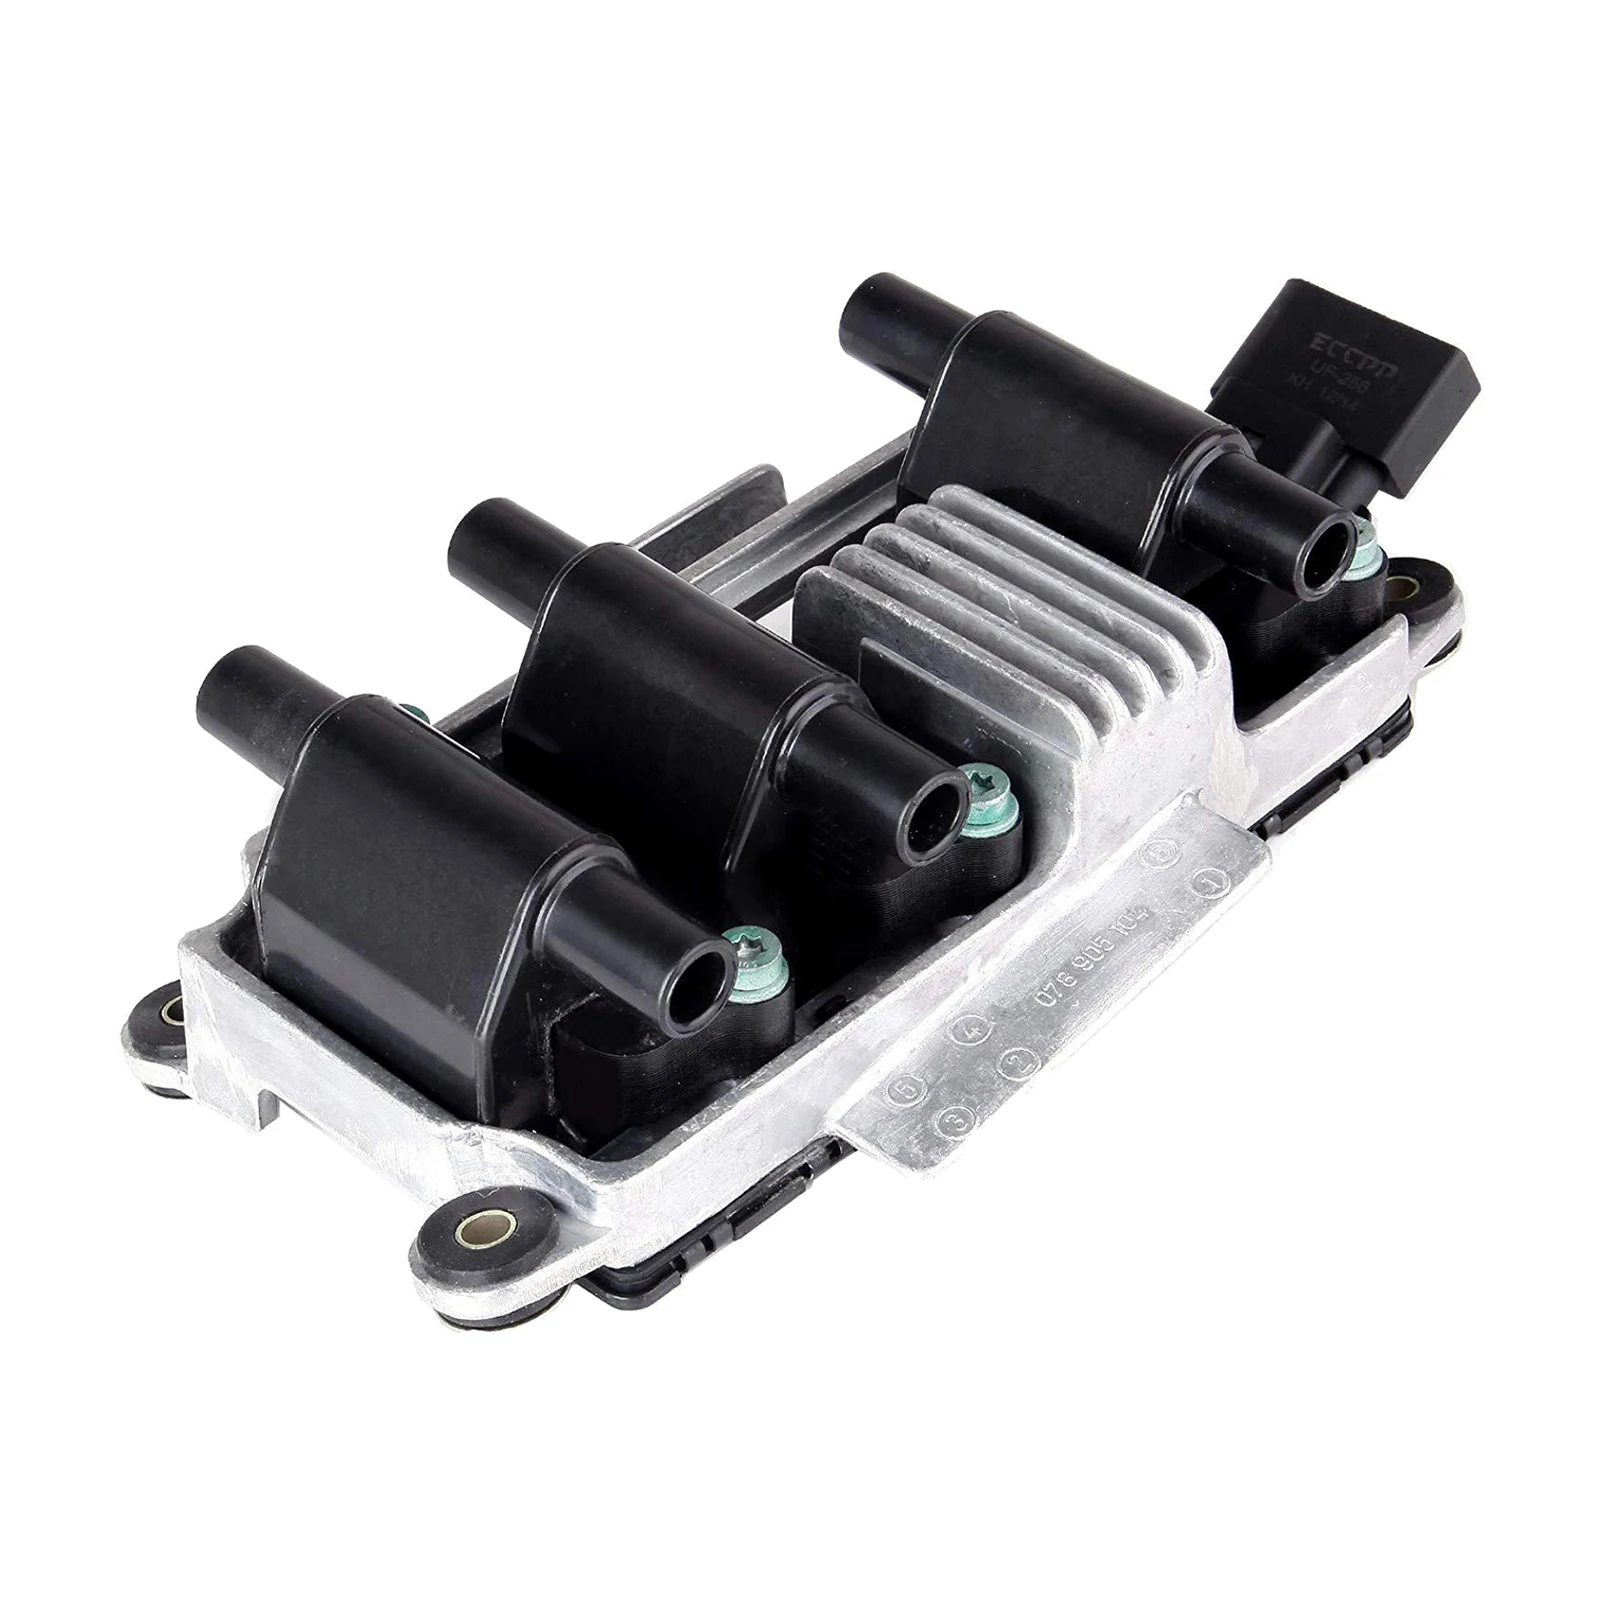 High Quality Ignition Coil Pack Compatible for Audi A4 A6 97-01 for VW Passat 98-05 Car Accessory 078905104